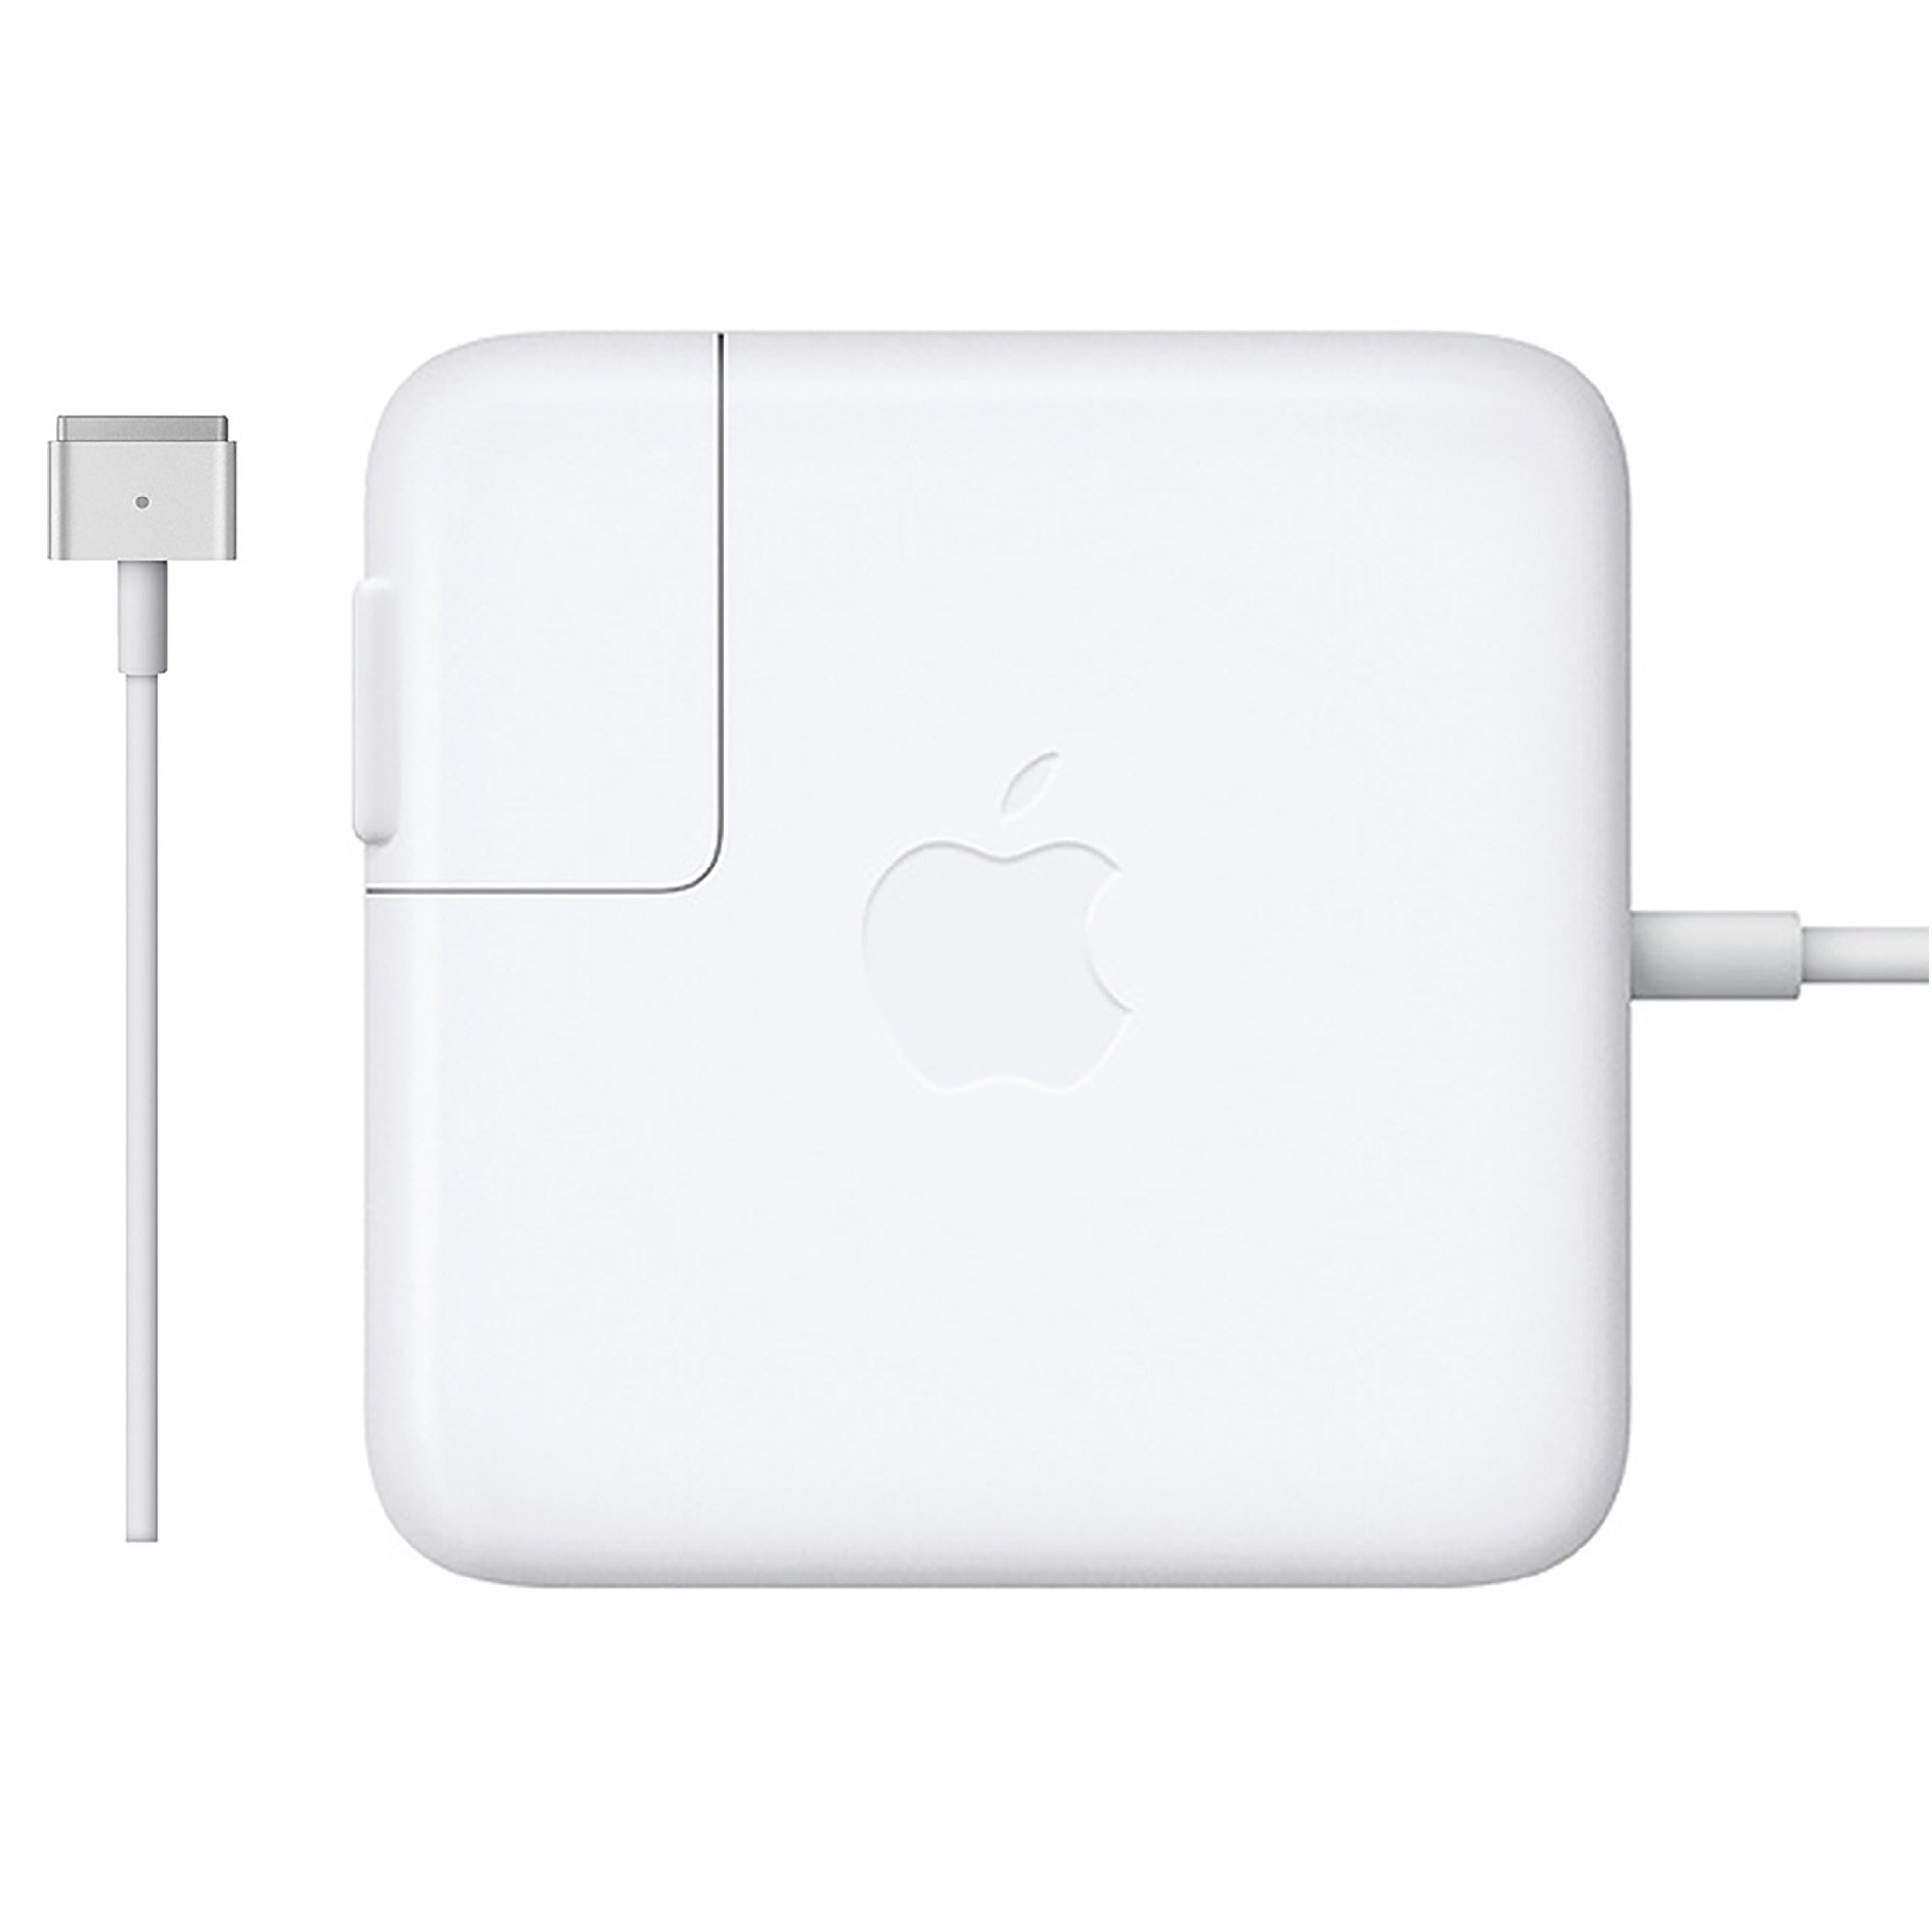 Apple Macbook A1184 Magsafe 2 Power Charger in Pakistan – Laptop Spares